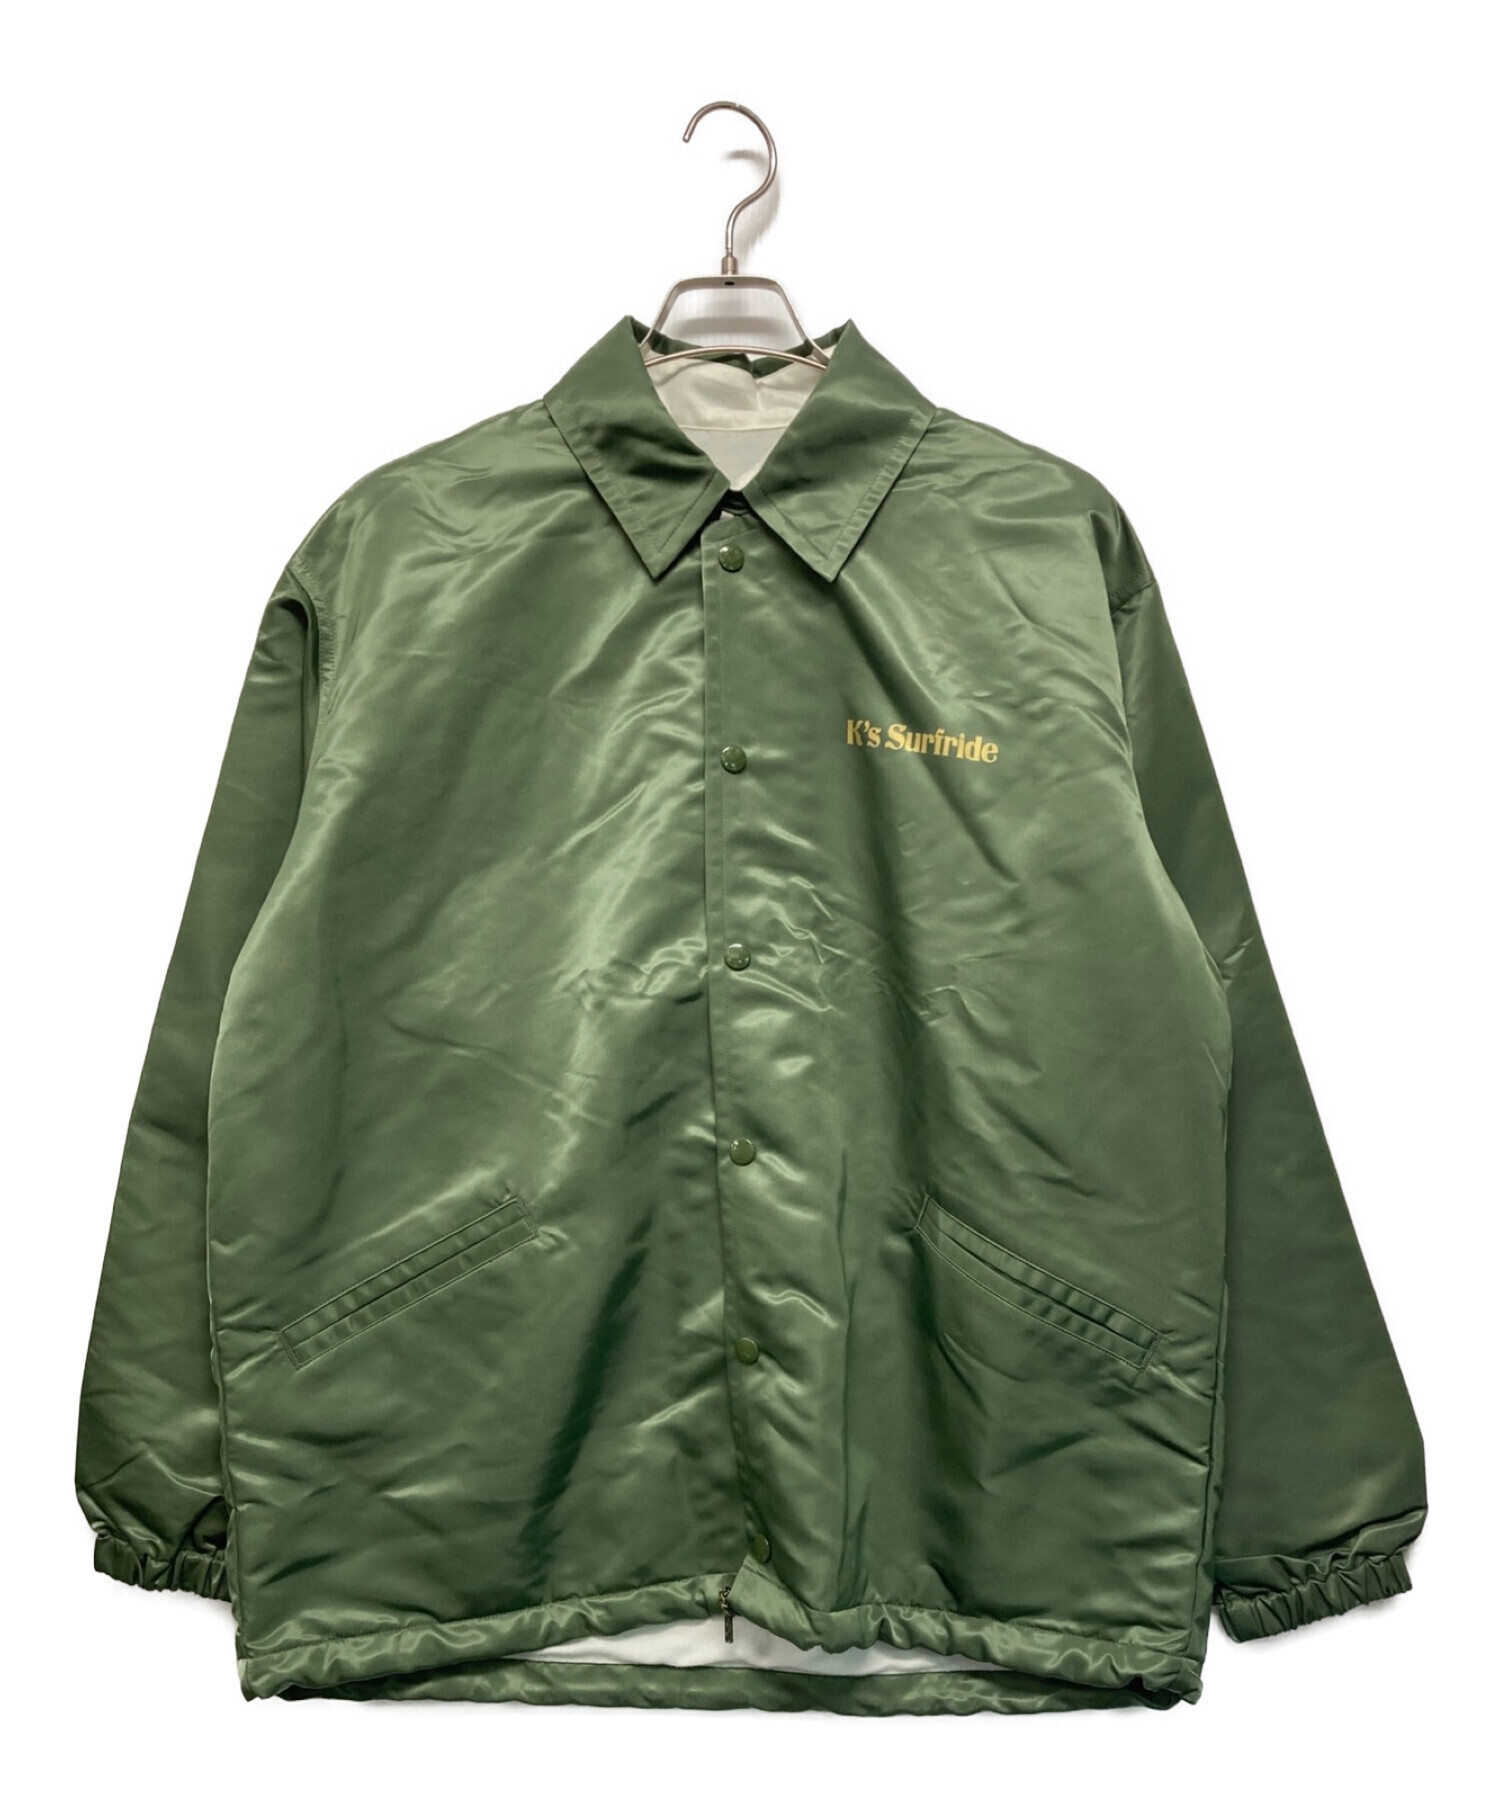 subculture  K's surfride COACHES JACKETそのようなことはないでしょうか